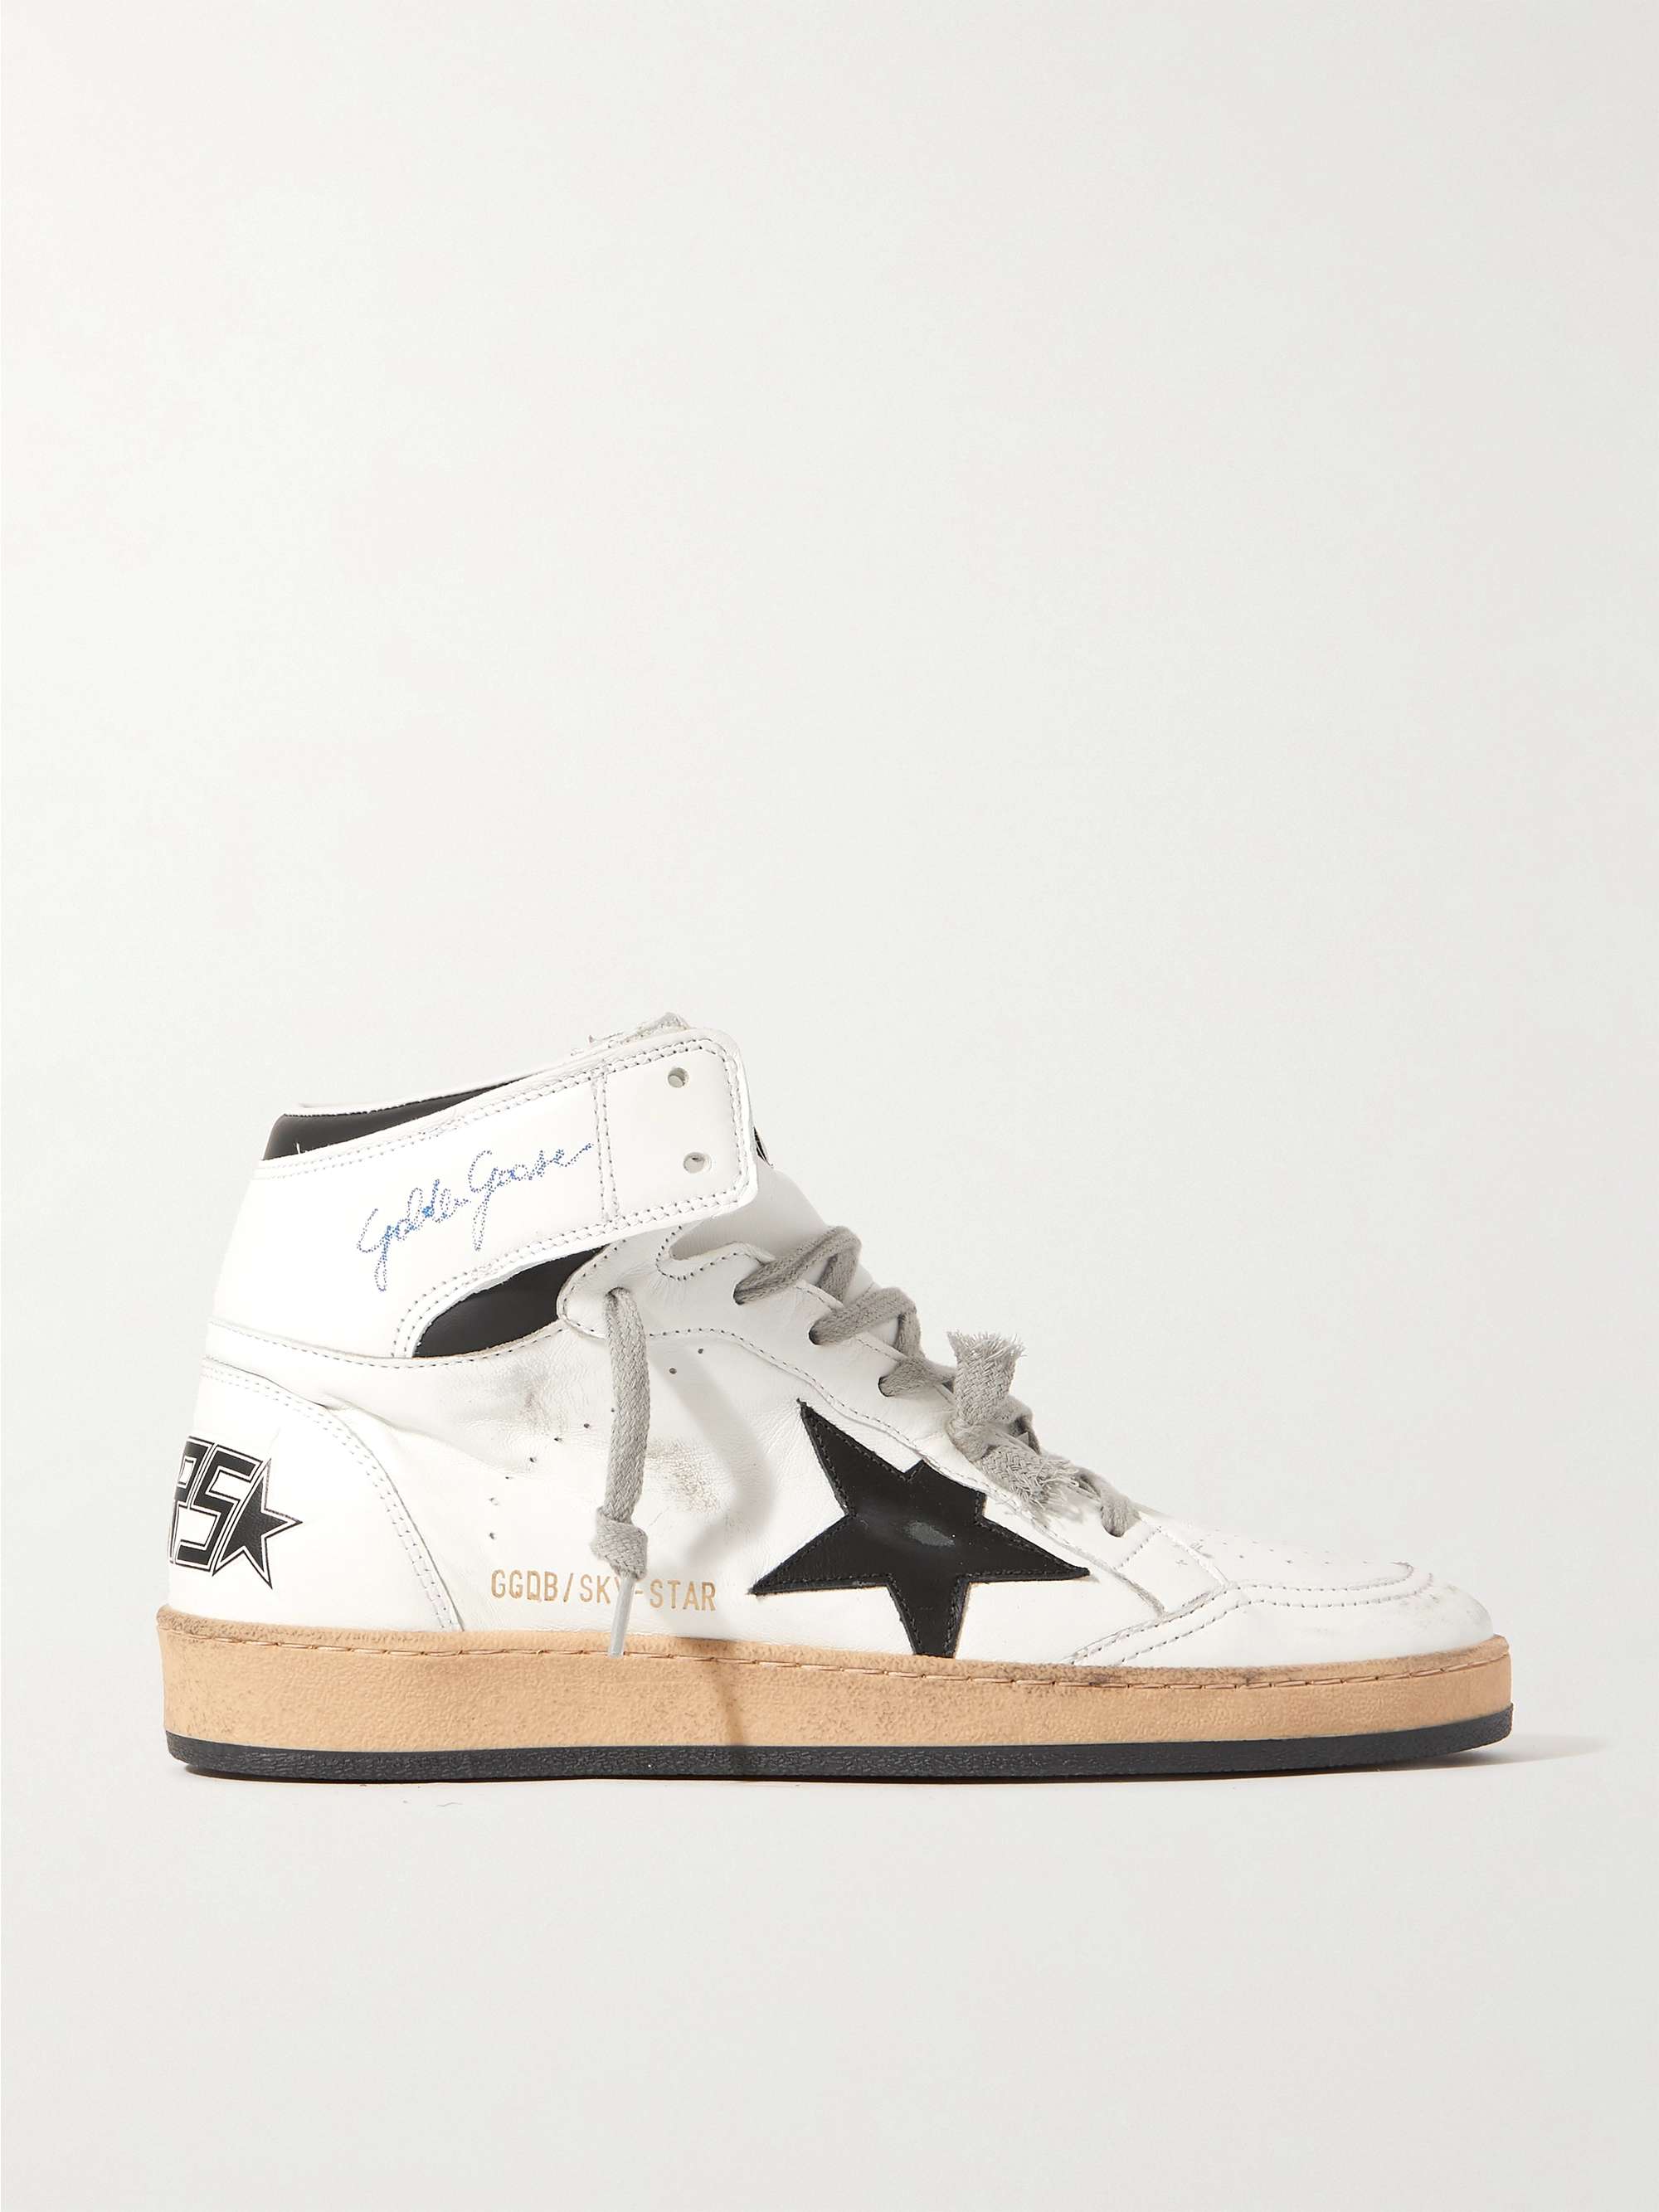 Men's Luxury Shoes - Golden Goose Sky Star Sneakers white and navy blue